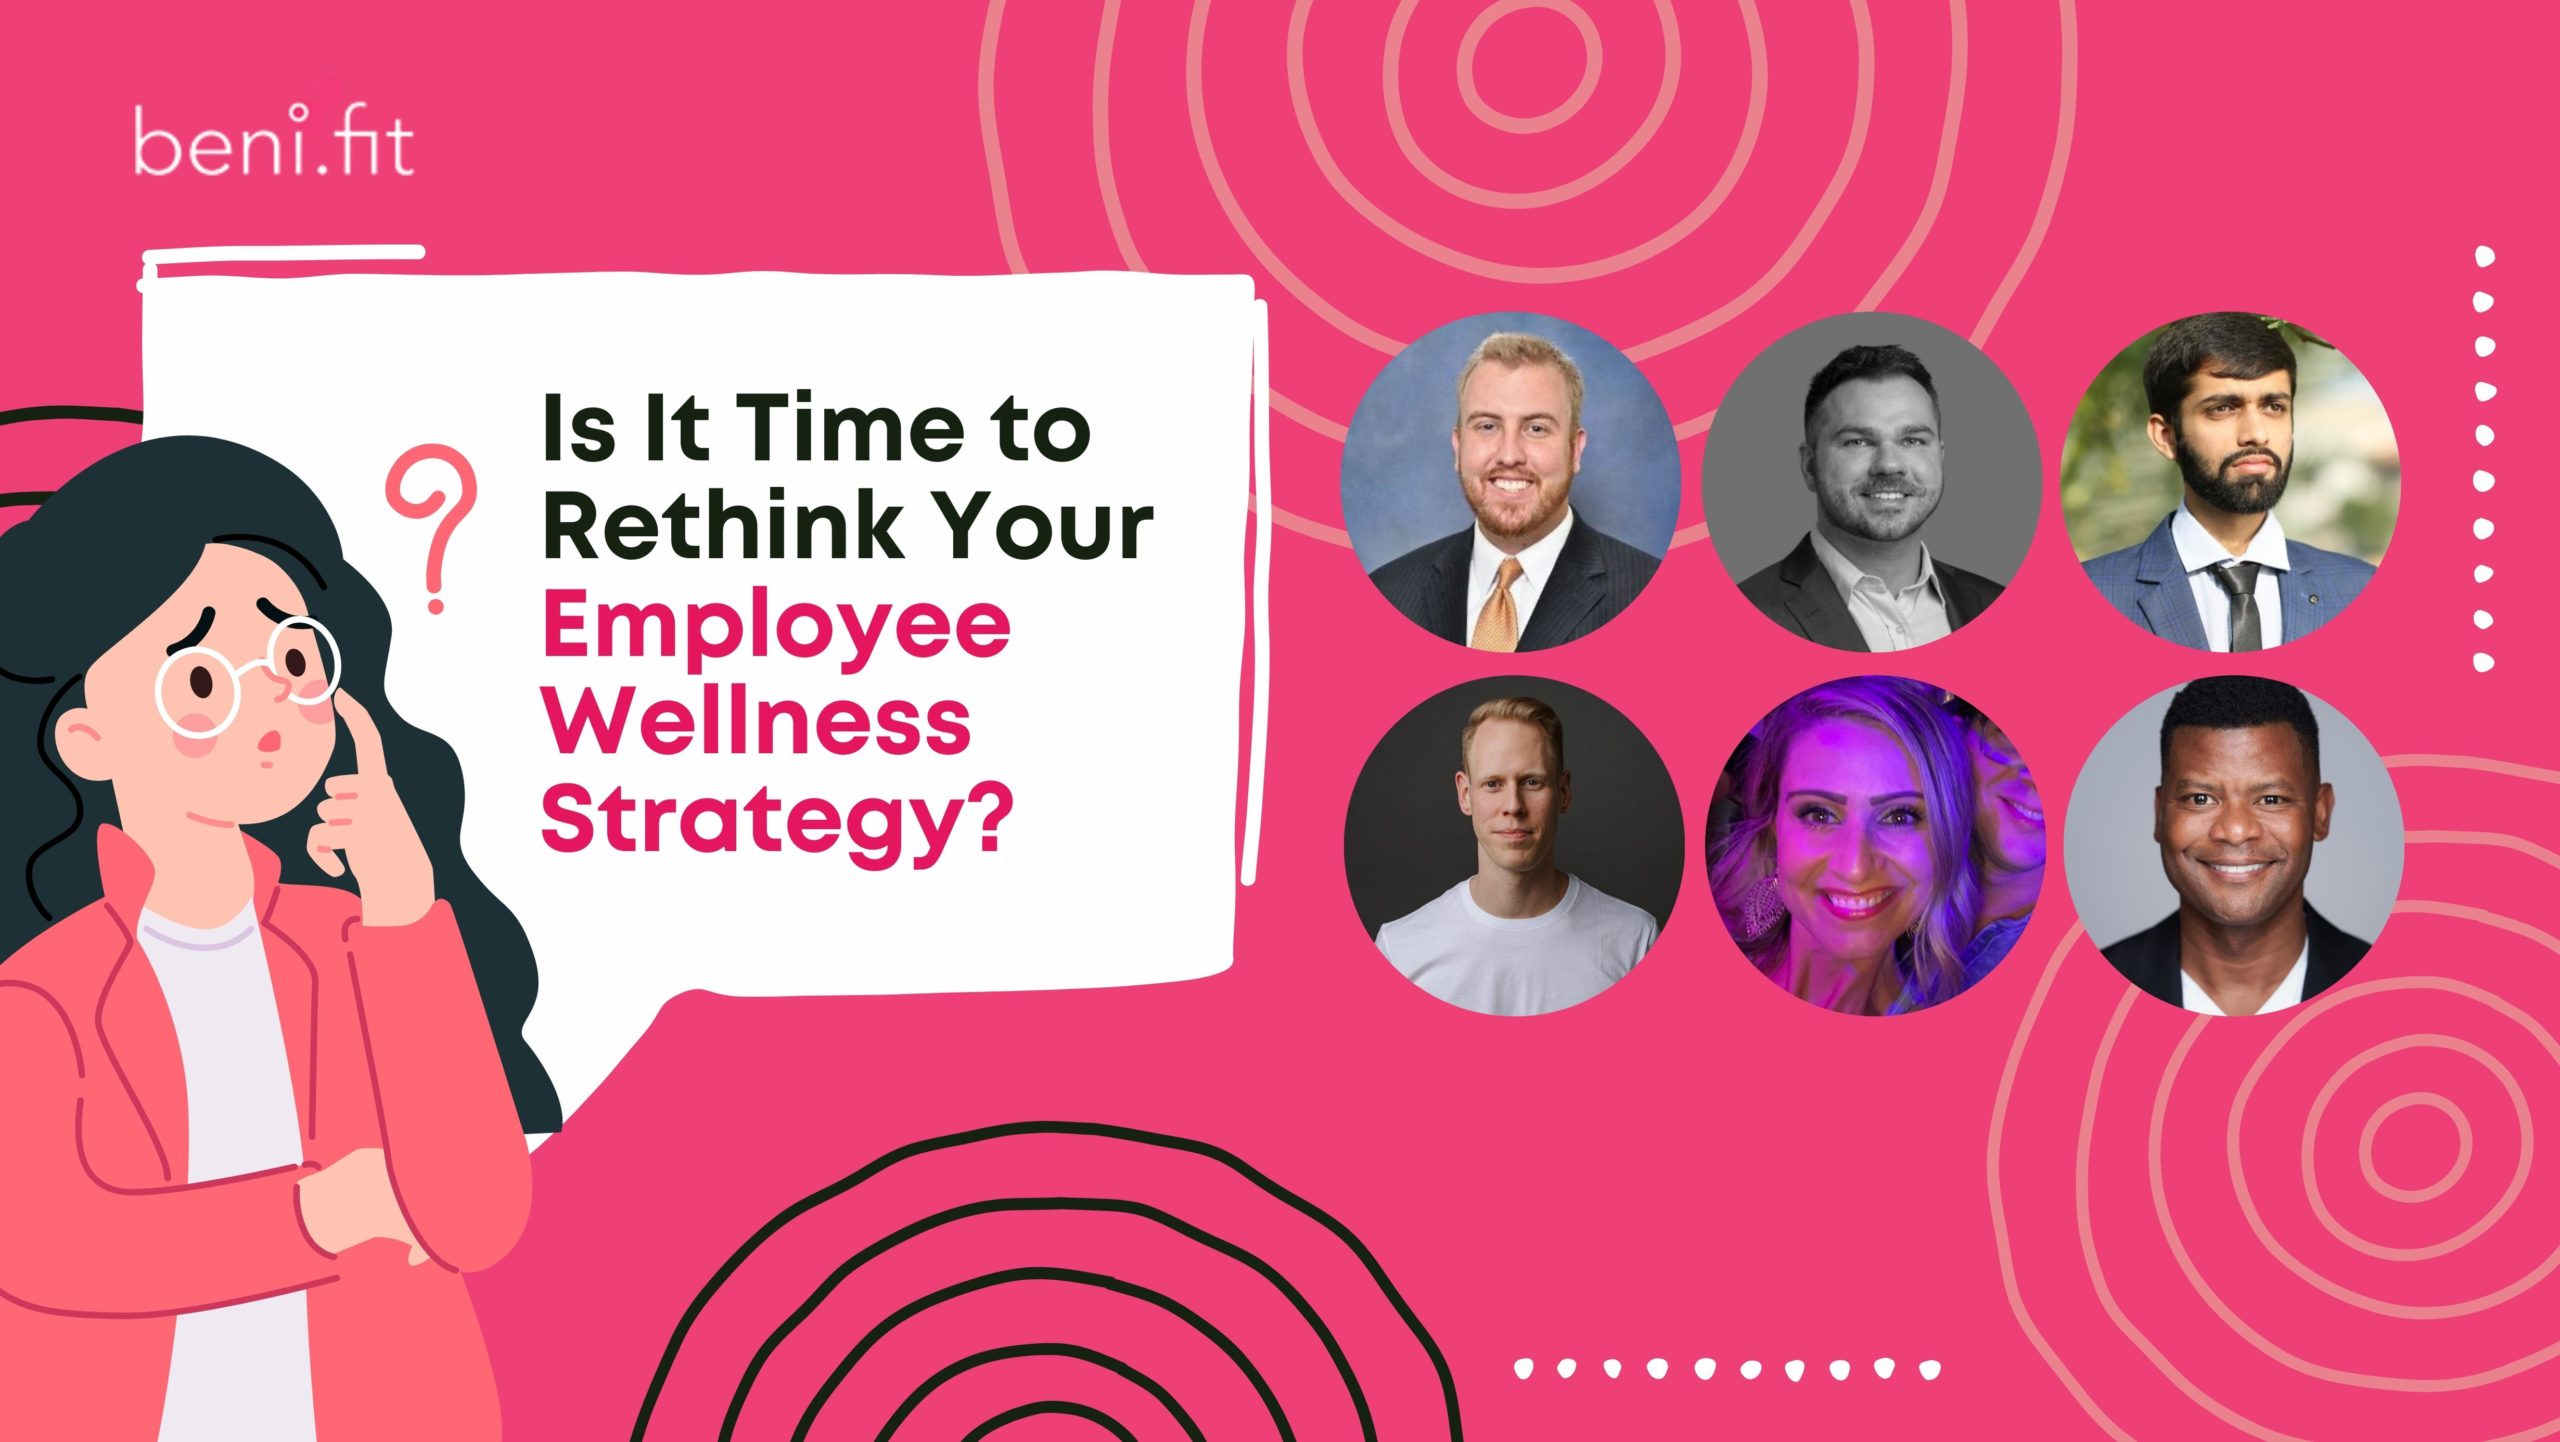 Is it Time to Rethink Your Employee Wellness Strategy